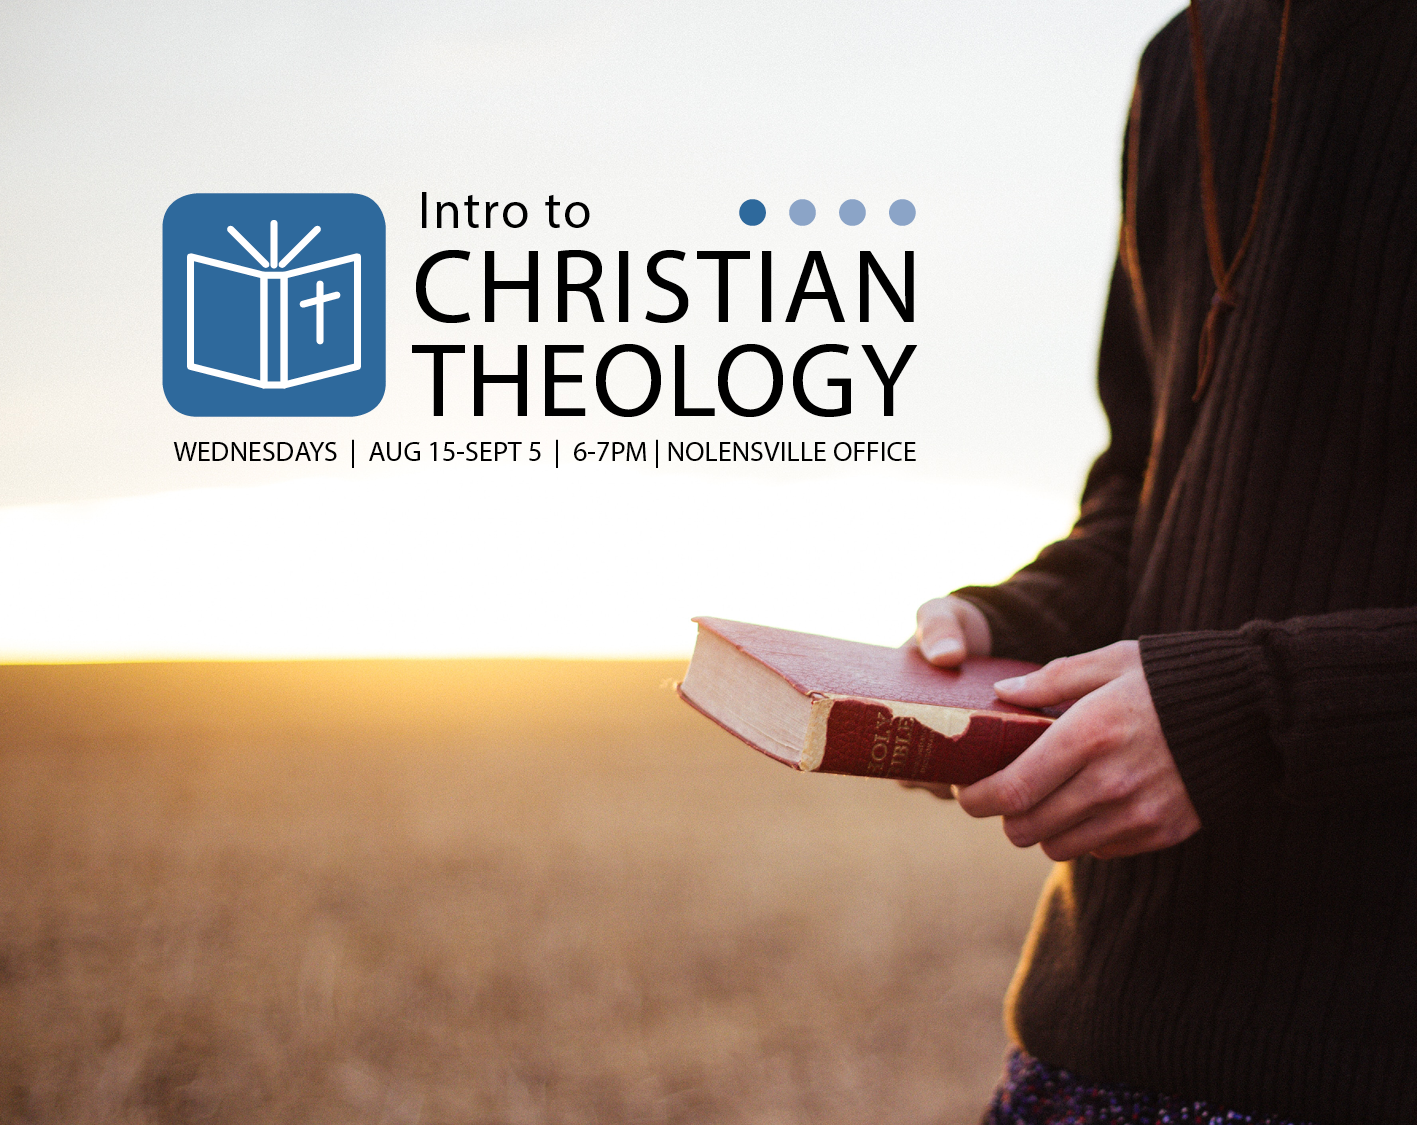 Intro to Christian Theology